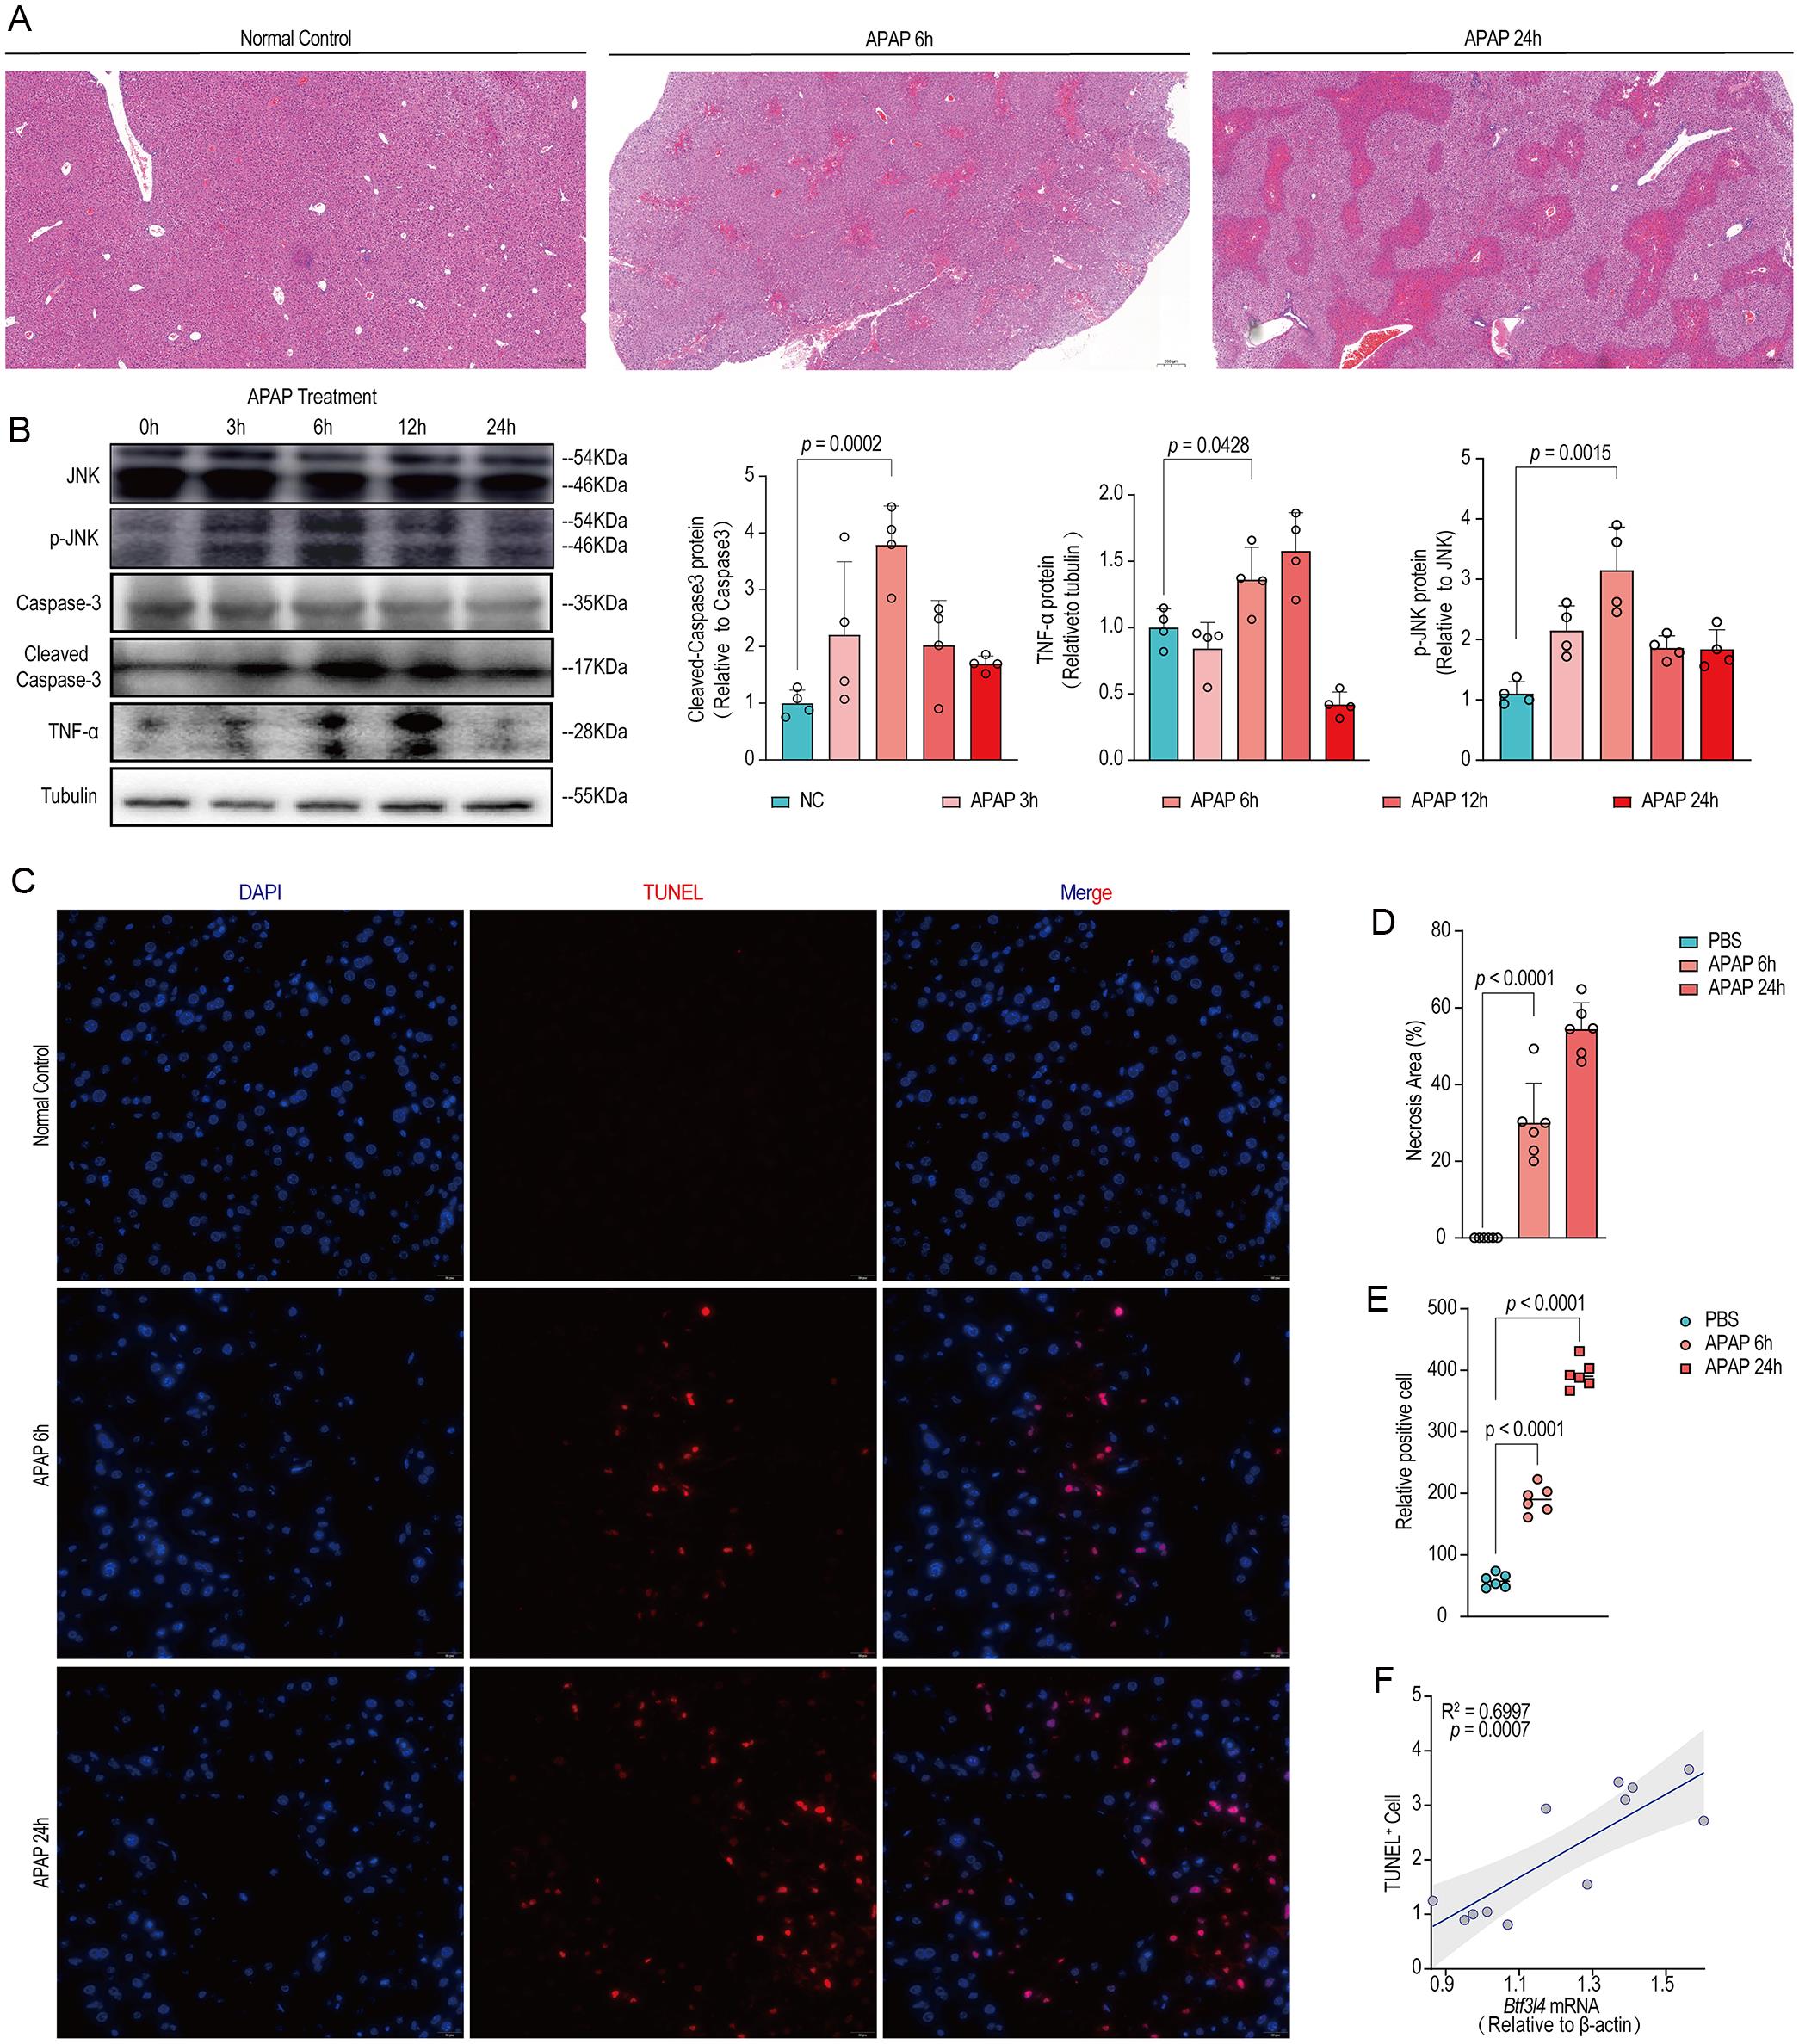 BTF3L4 protein expression is positively correlated with hepatic injury in APAP-induced mouse model of liver injury.